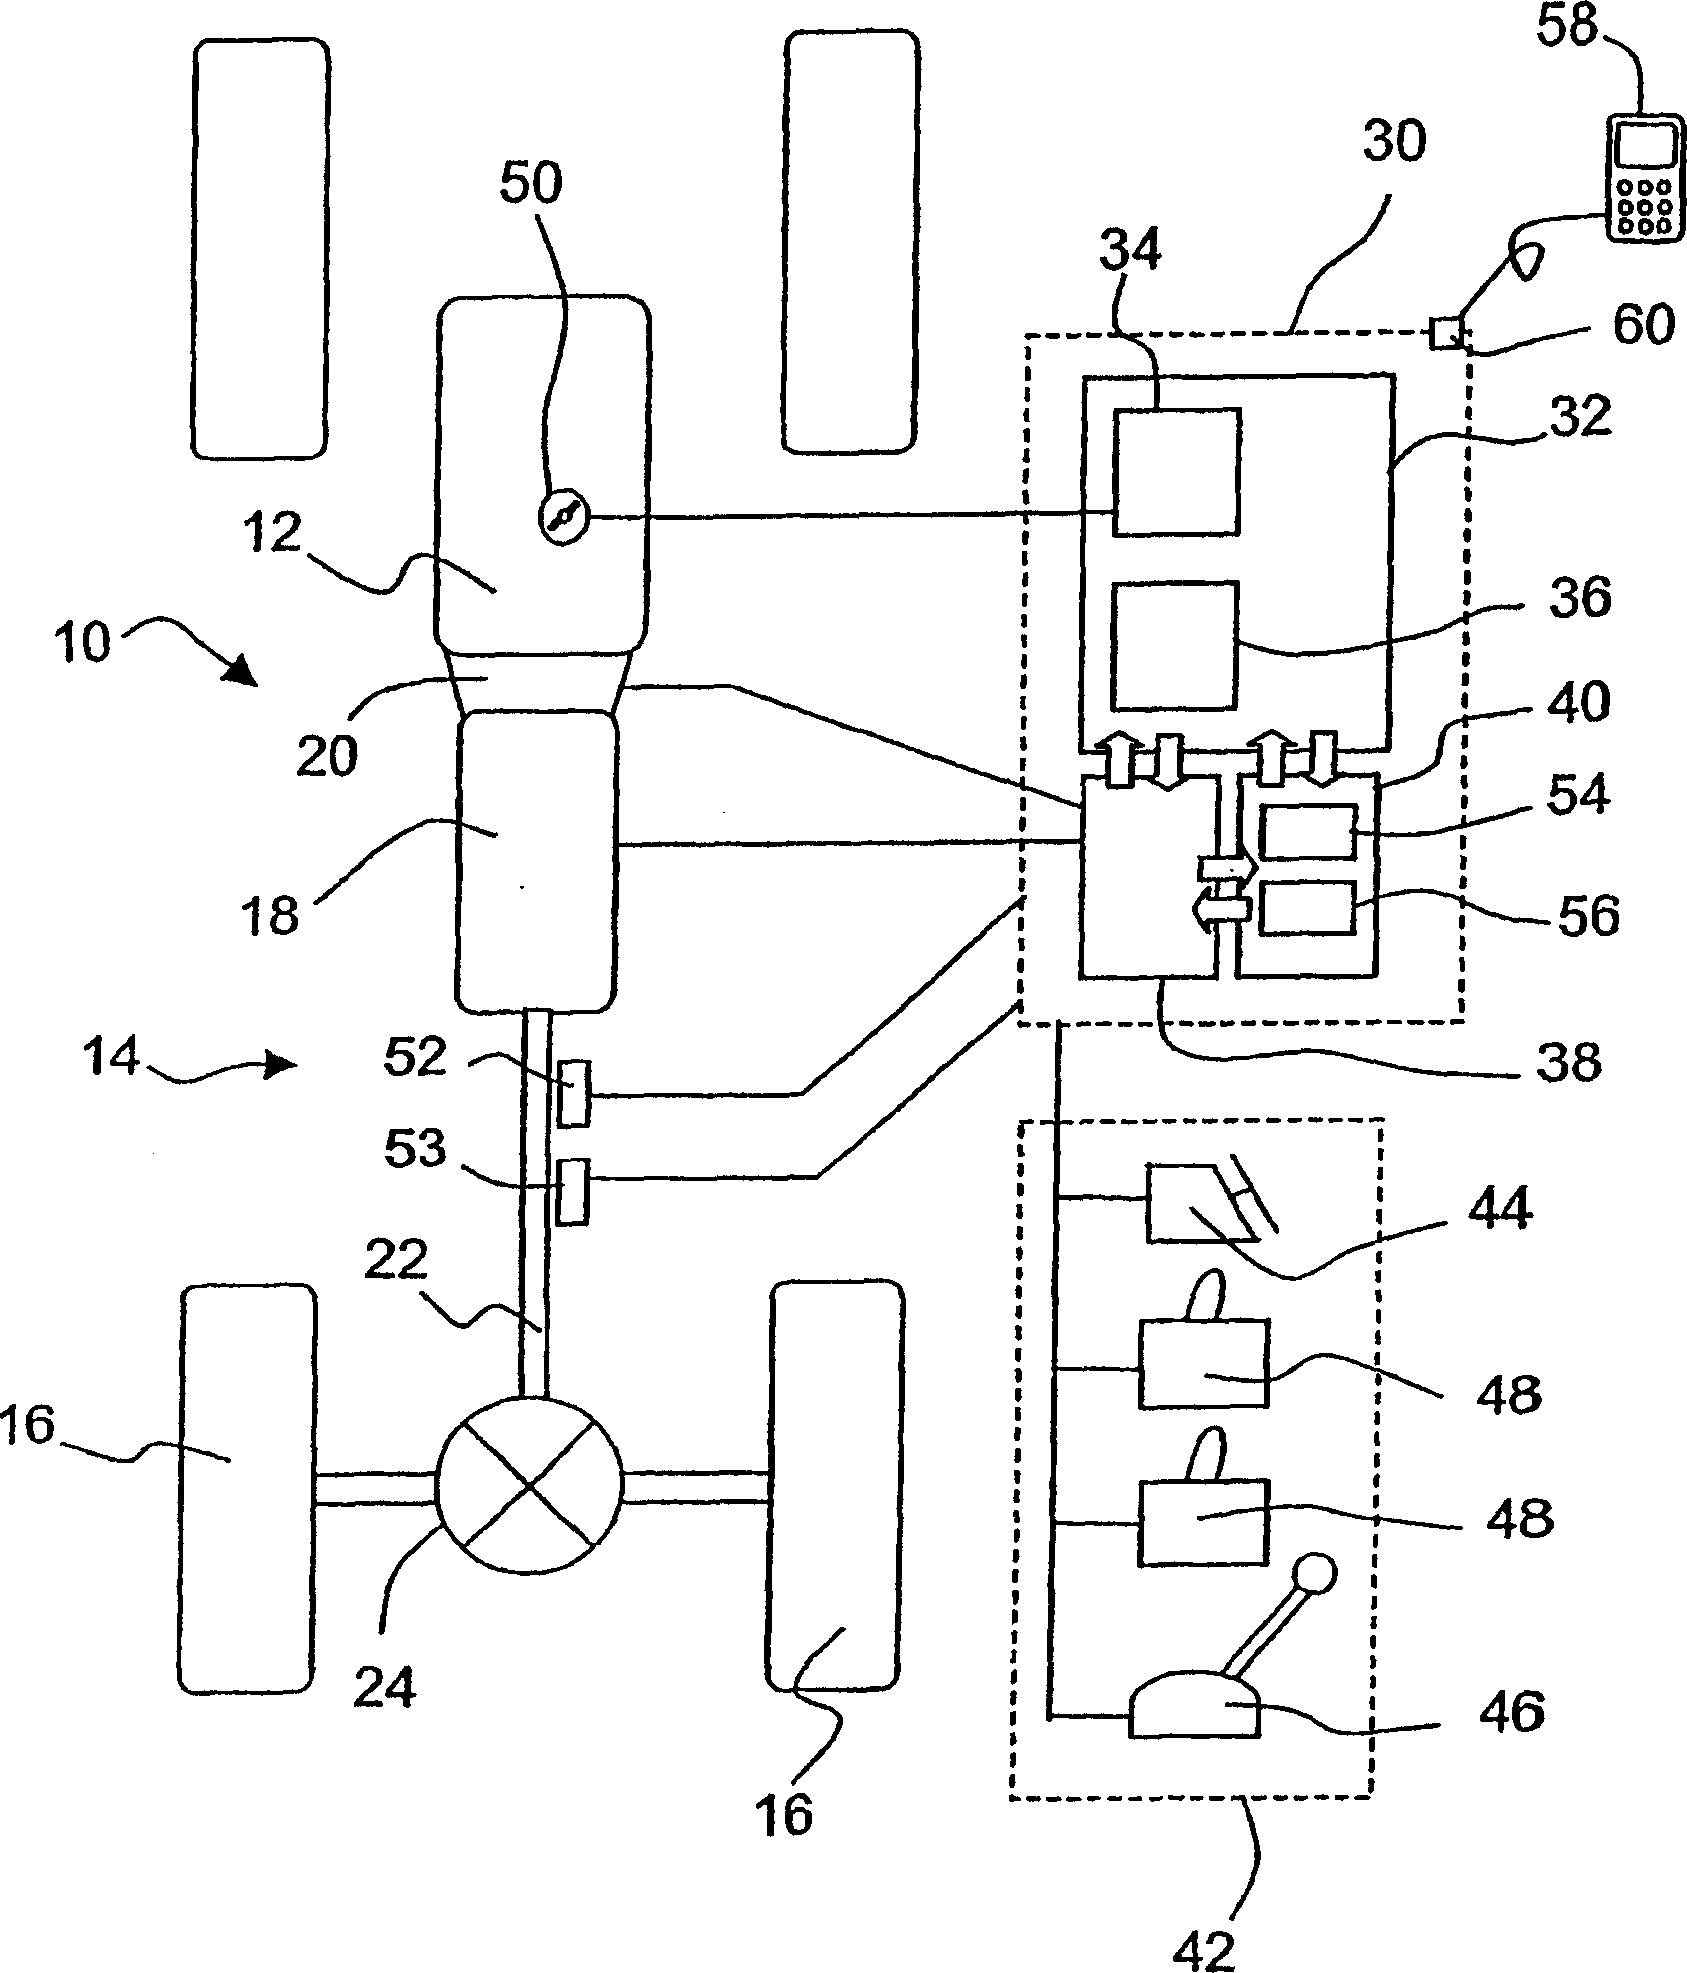 Method and arrangement for controlling actual torque in a land vehicle driveline